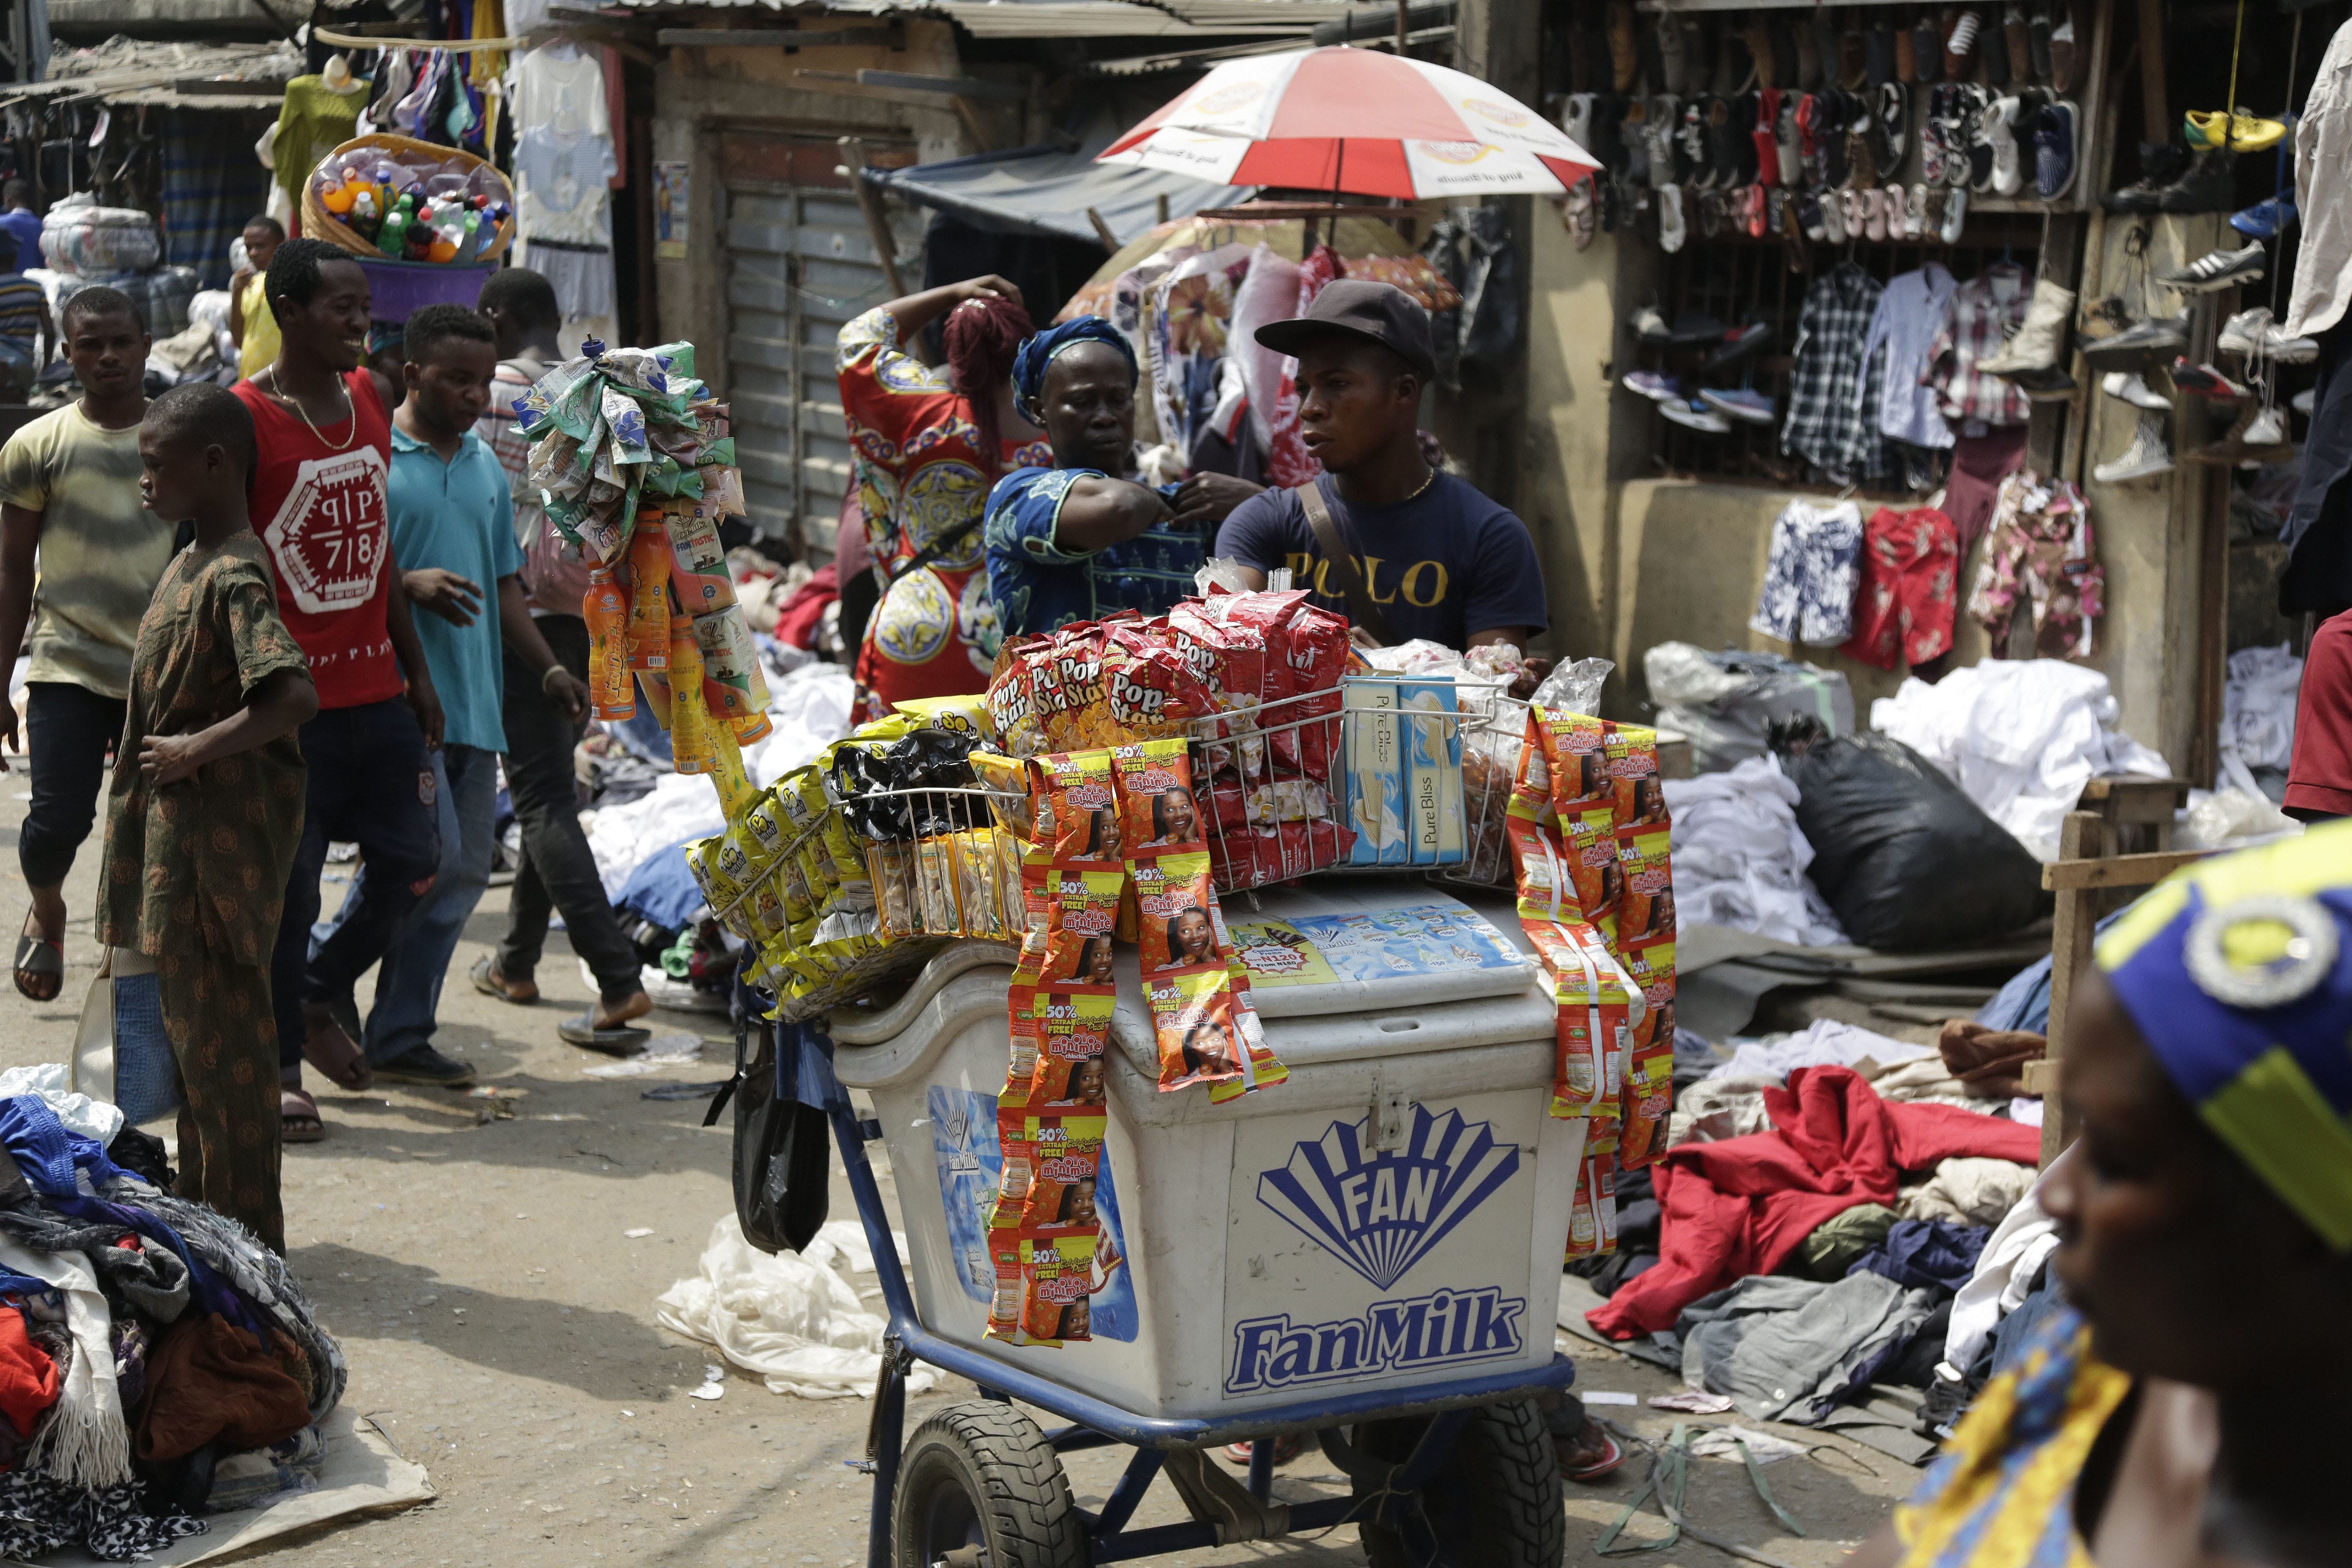 Pedestrians shop in a roadside market in Lagos, Nigeria, Friday, Jan. 12, 2018. Africans were shocked on Friday to find President Donald Trump had finally taken an interest in their continent. But it wasn't what people had hoped for. Using vulgar language, Trump on Thursday questioned why the U.S. would accept more immigrants from Haiti and "shithole countries" in Africa rather than places like Norway in rejecting a bipartisan immigration deal. On Friday he denied using that language.